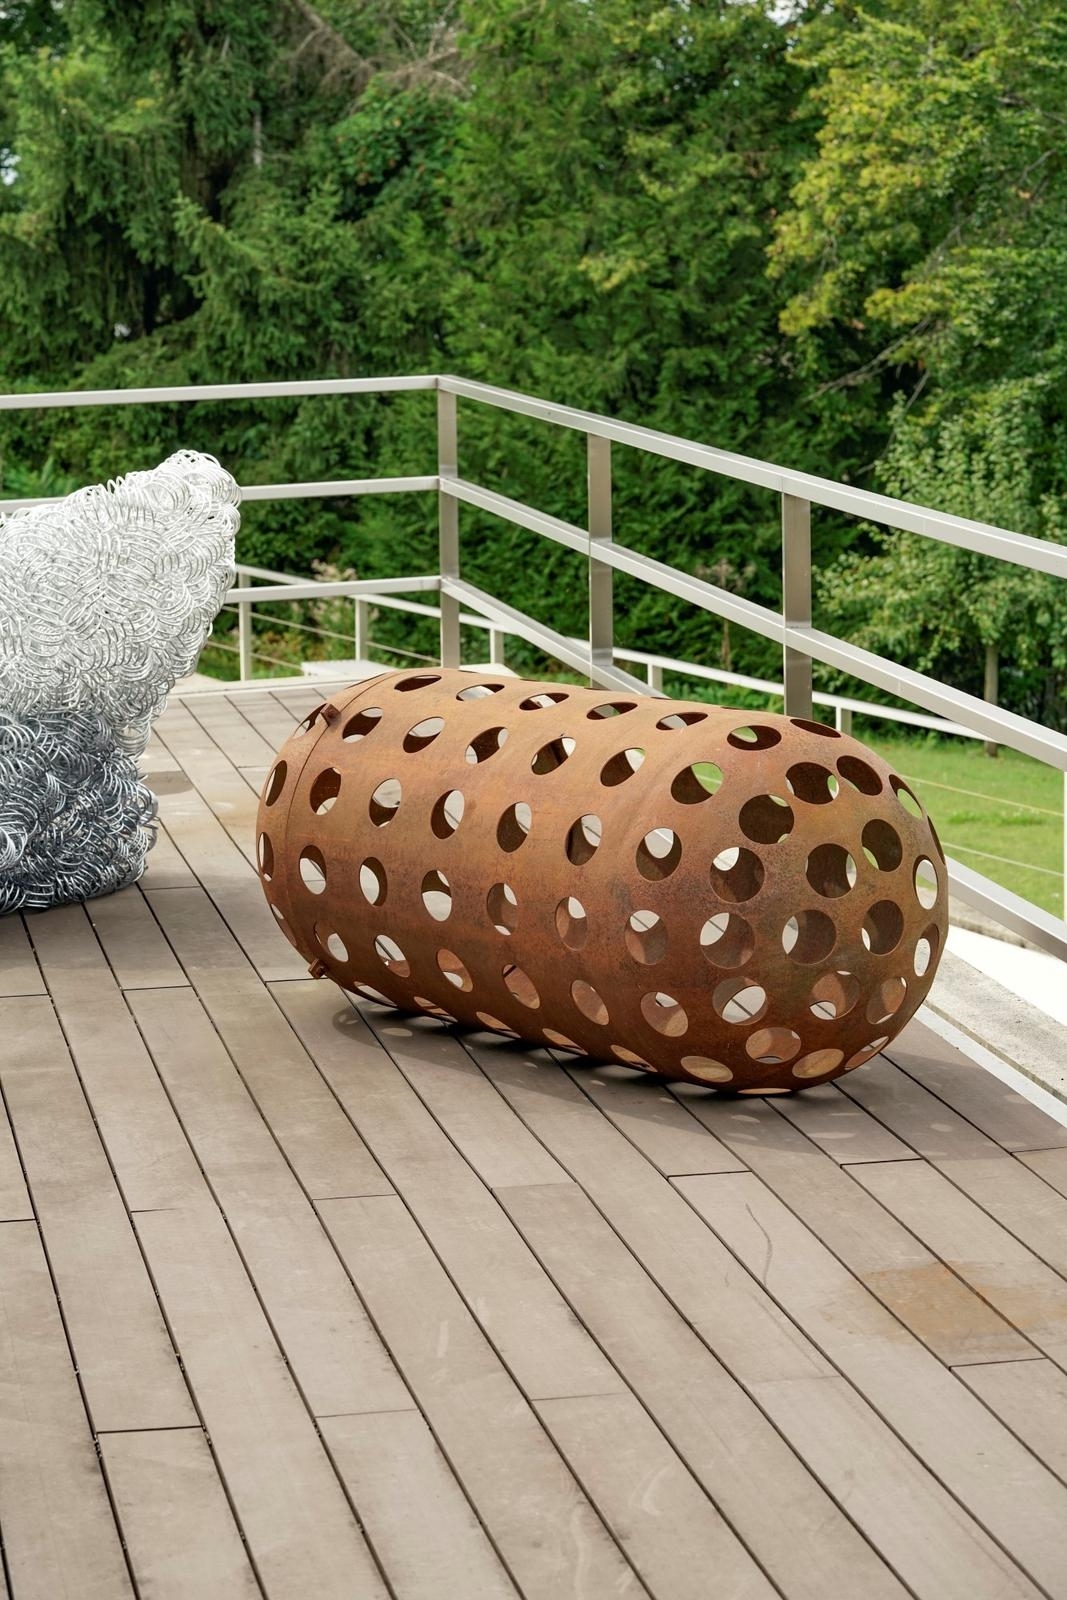 Artwork by Fabrice Gygi, Capsule trouée, Made of steel sculpture